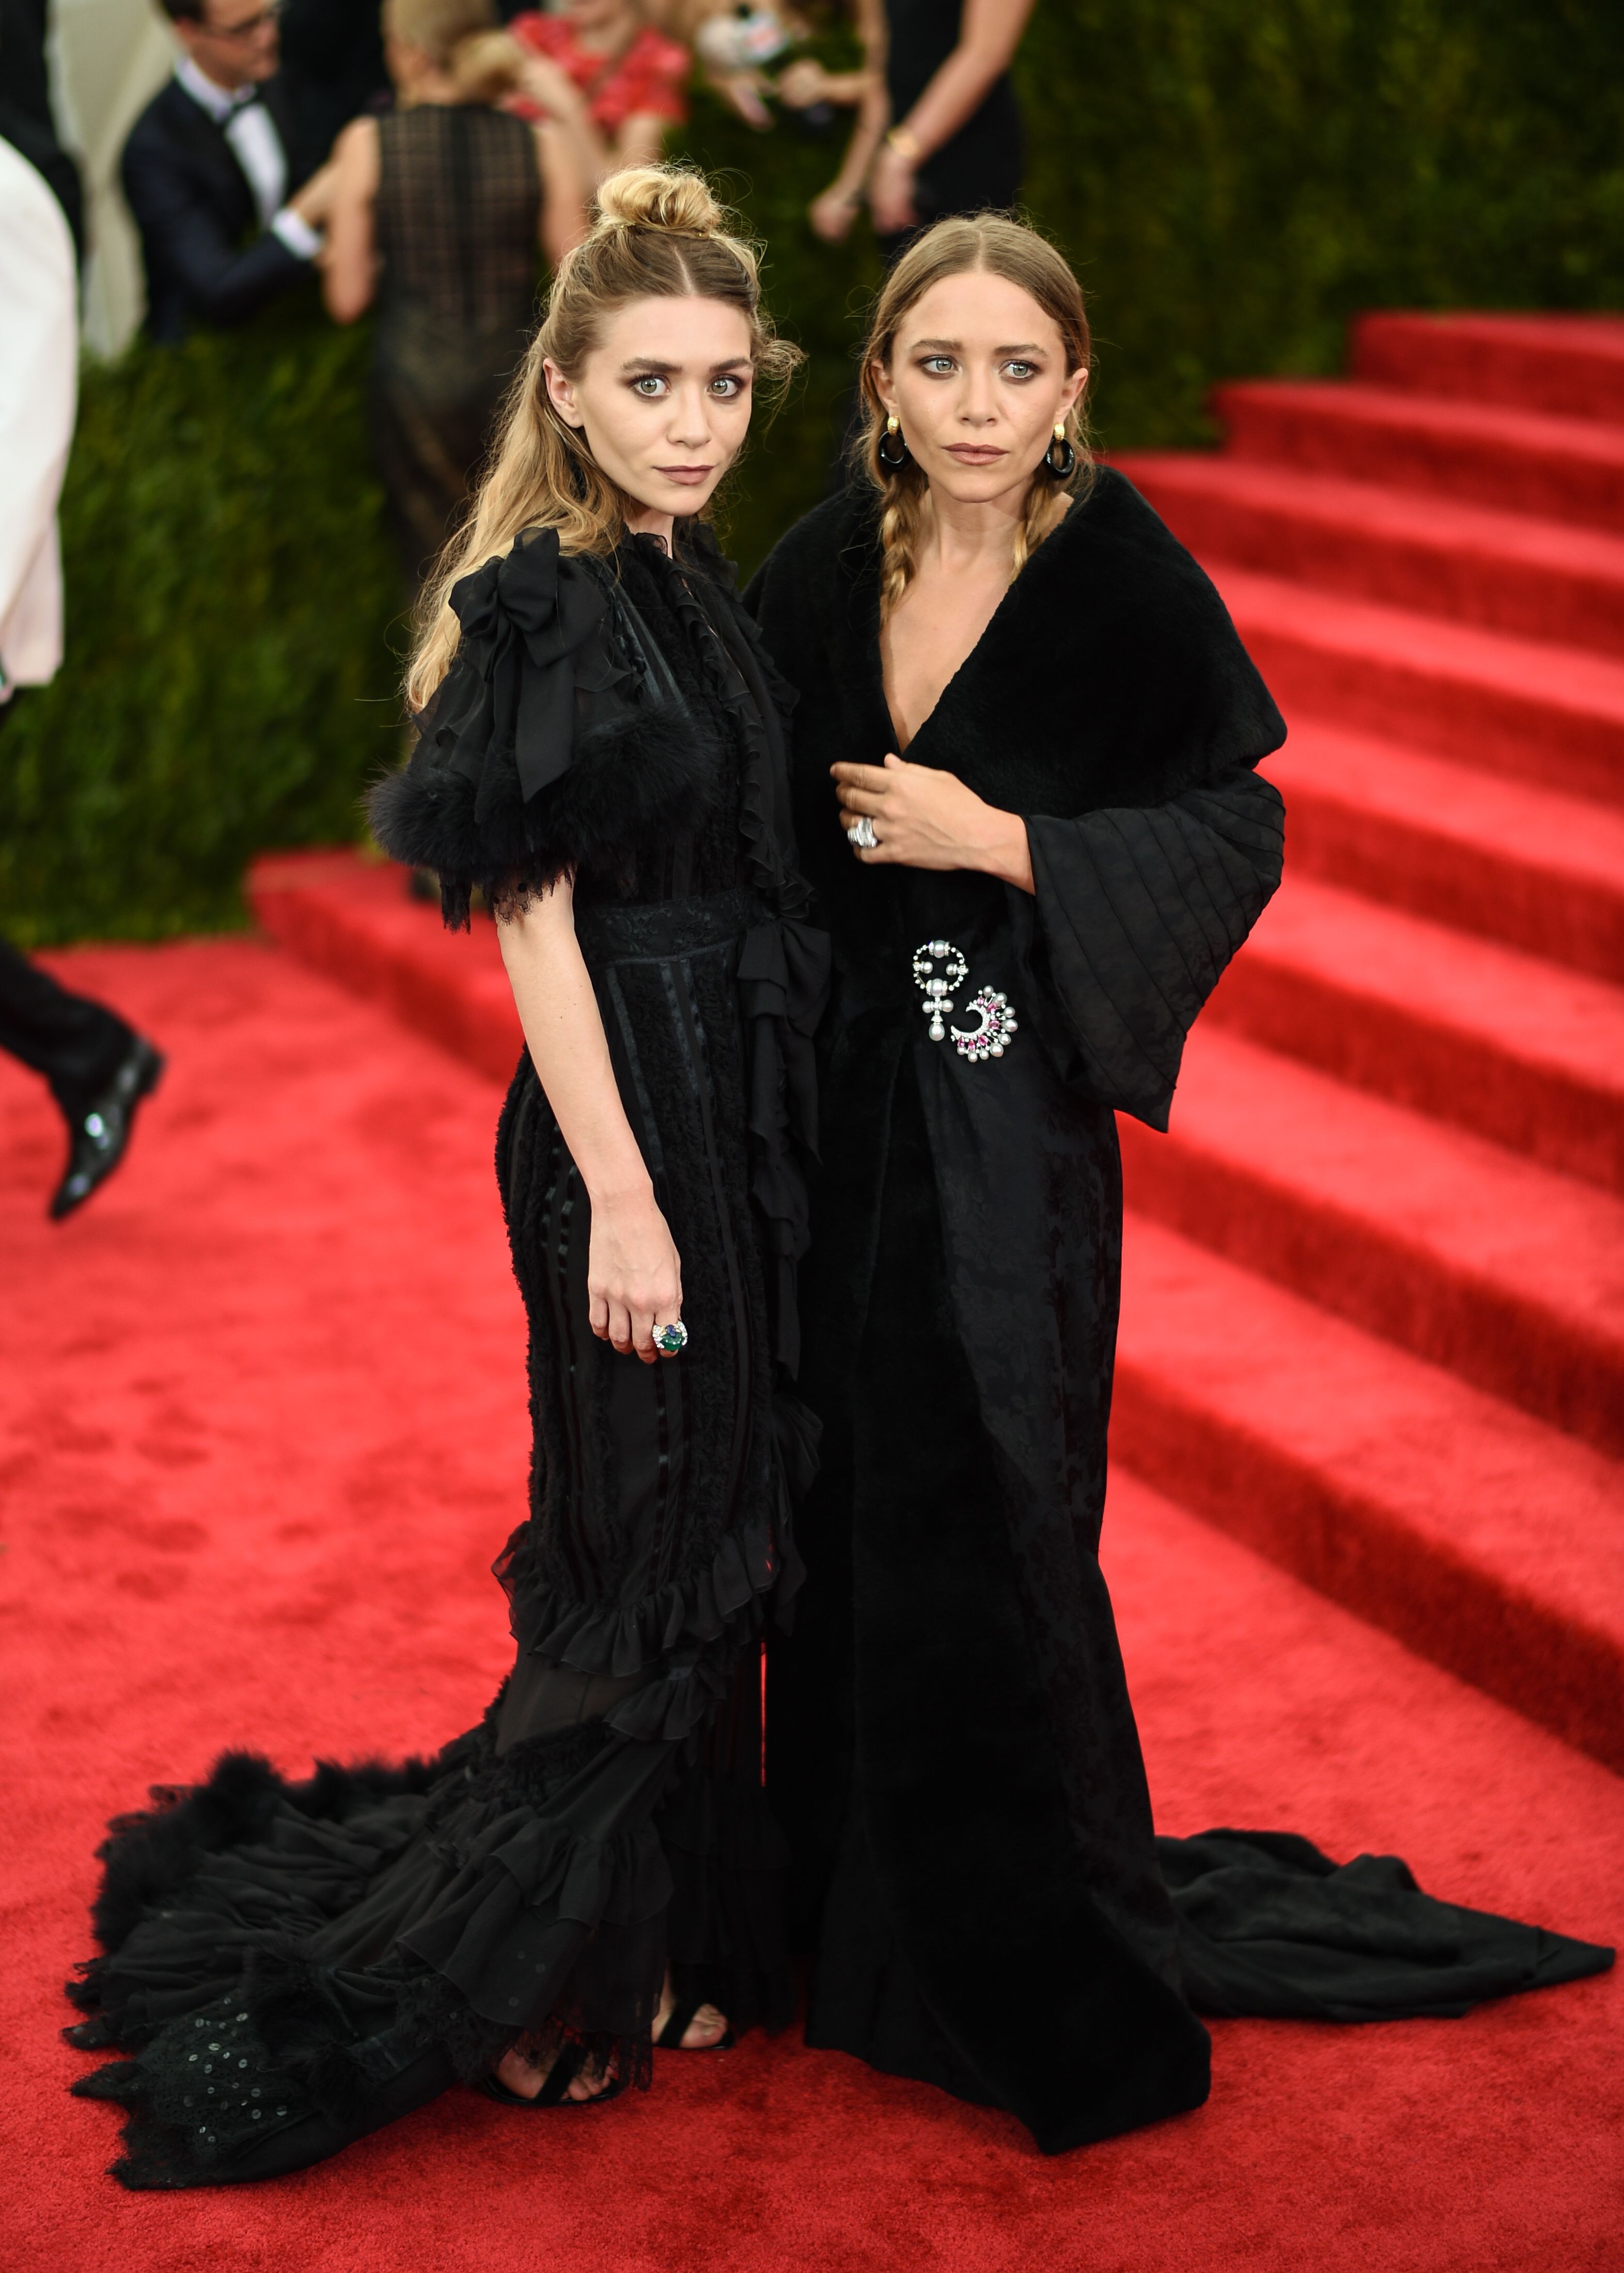 Image result for mary kate and ashley olsen